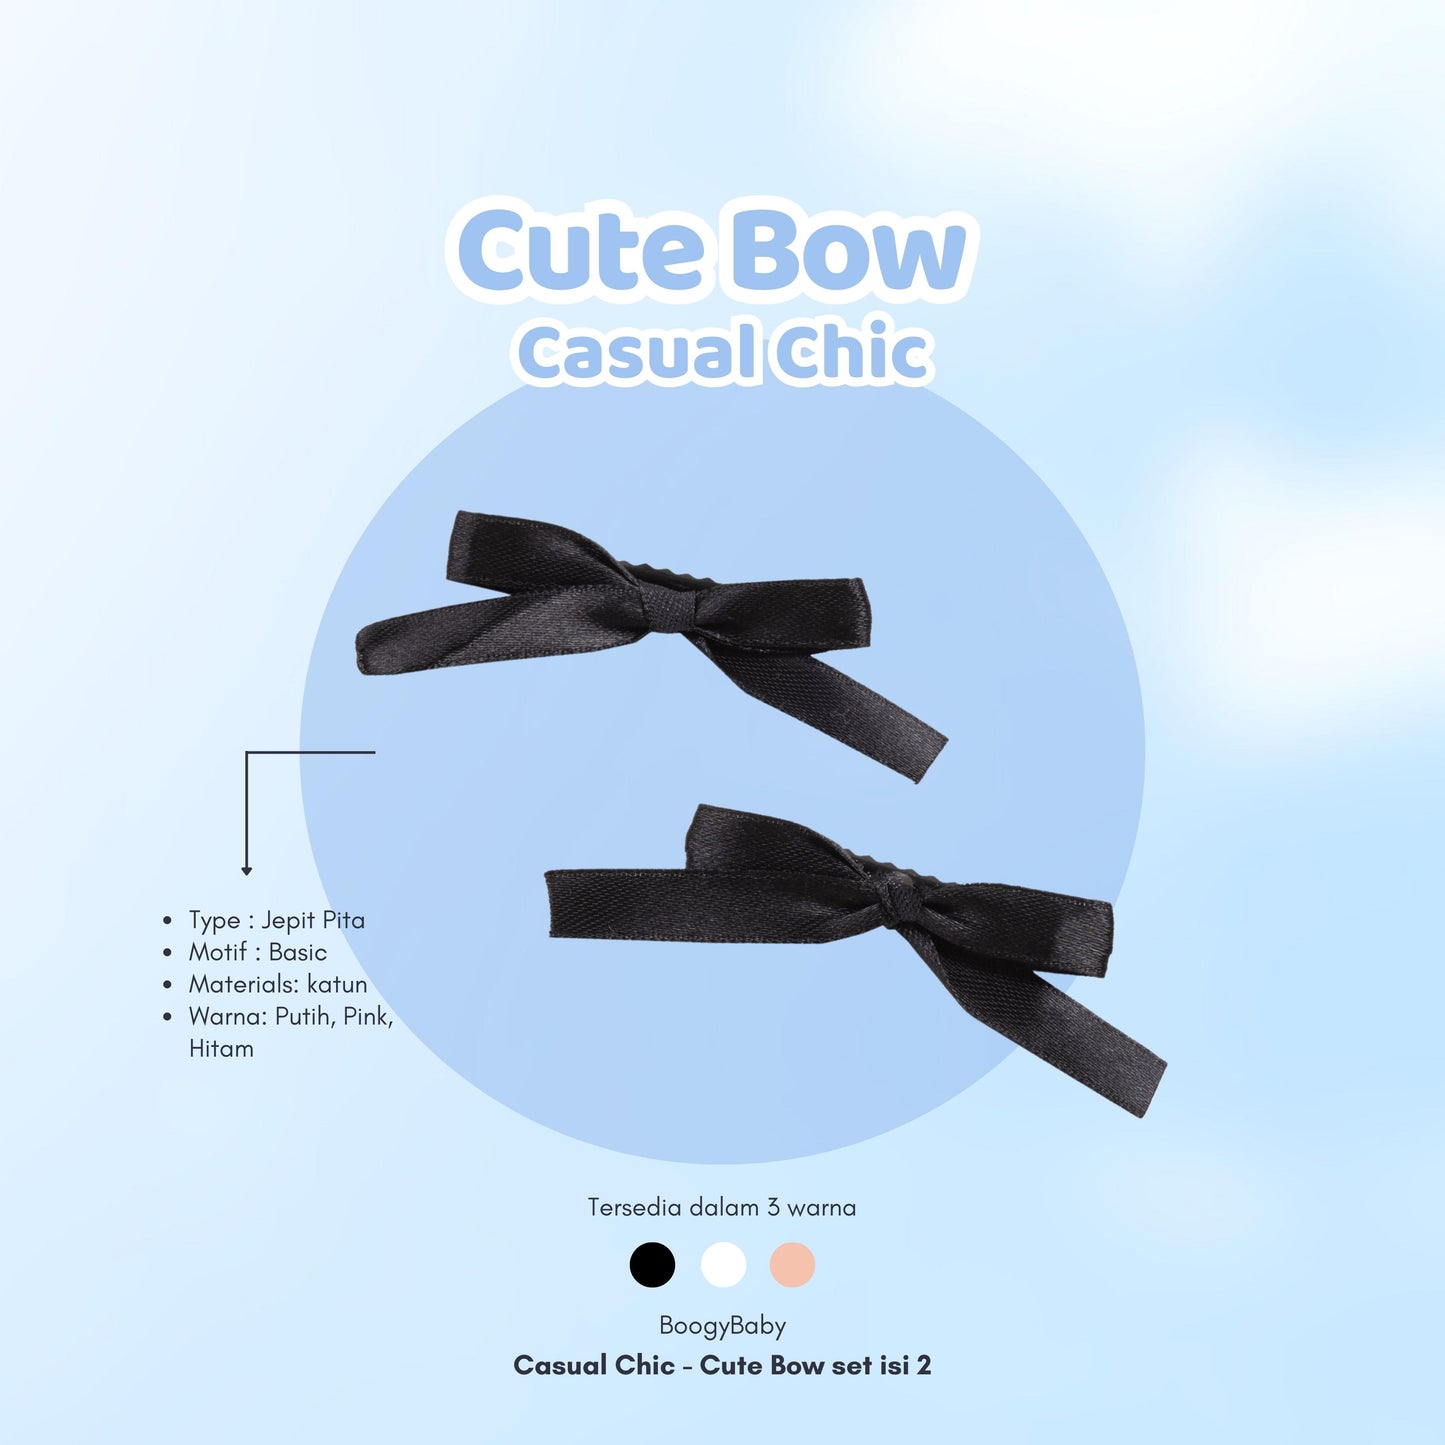 Cute Bow set isi 2 (Casual Chic)